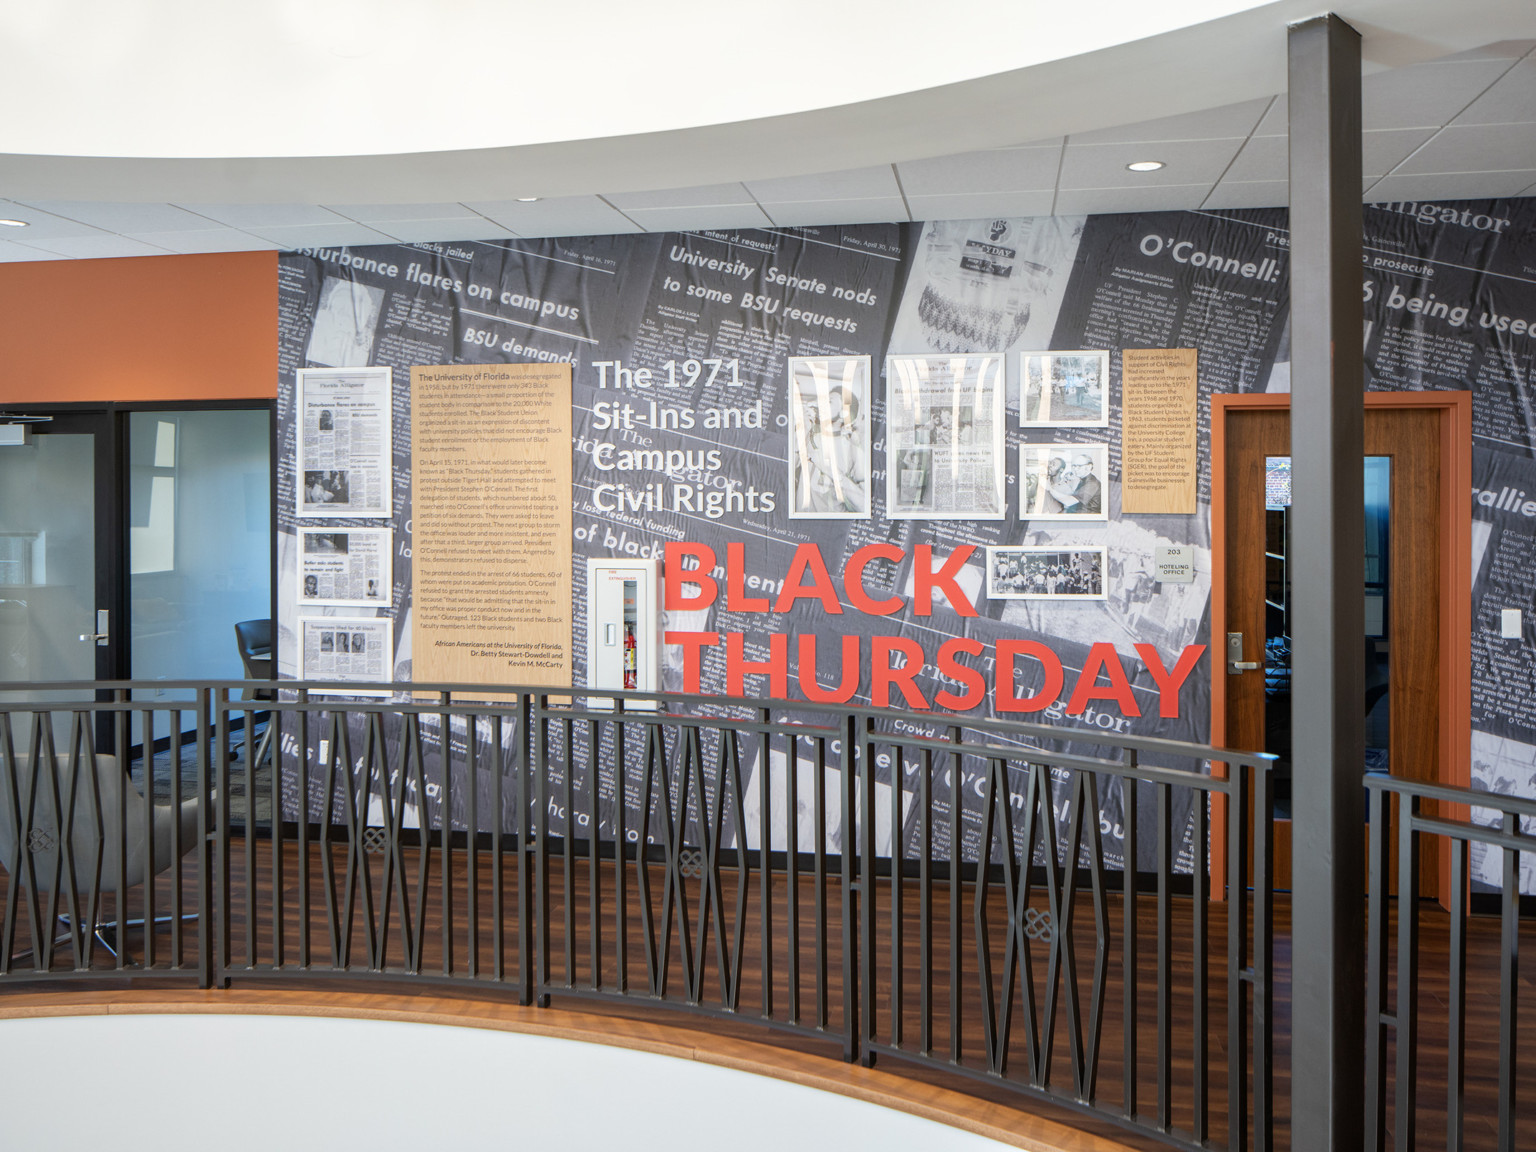 Black and white mural of newspaper clippings and information labeled Black Thursday, The 1971 Sit-Ins and Campus Civil Rights